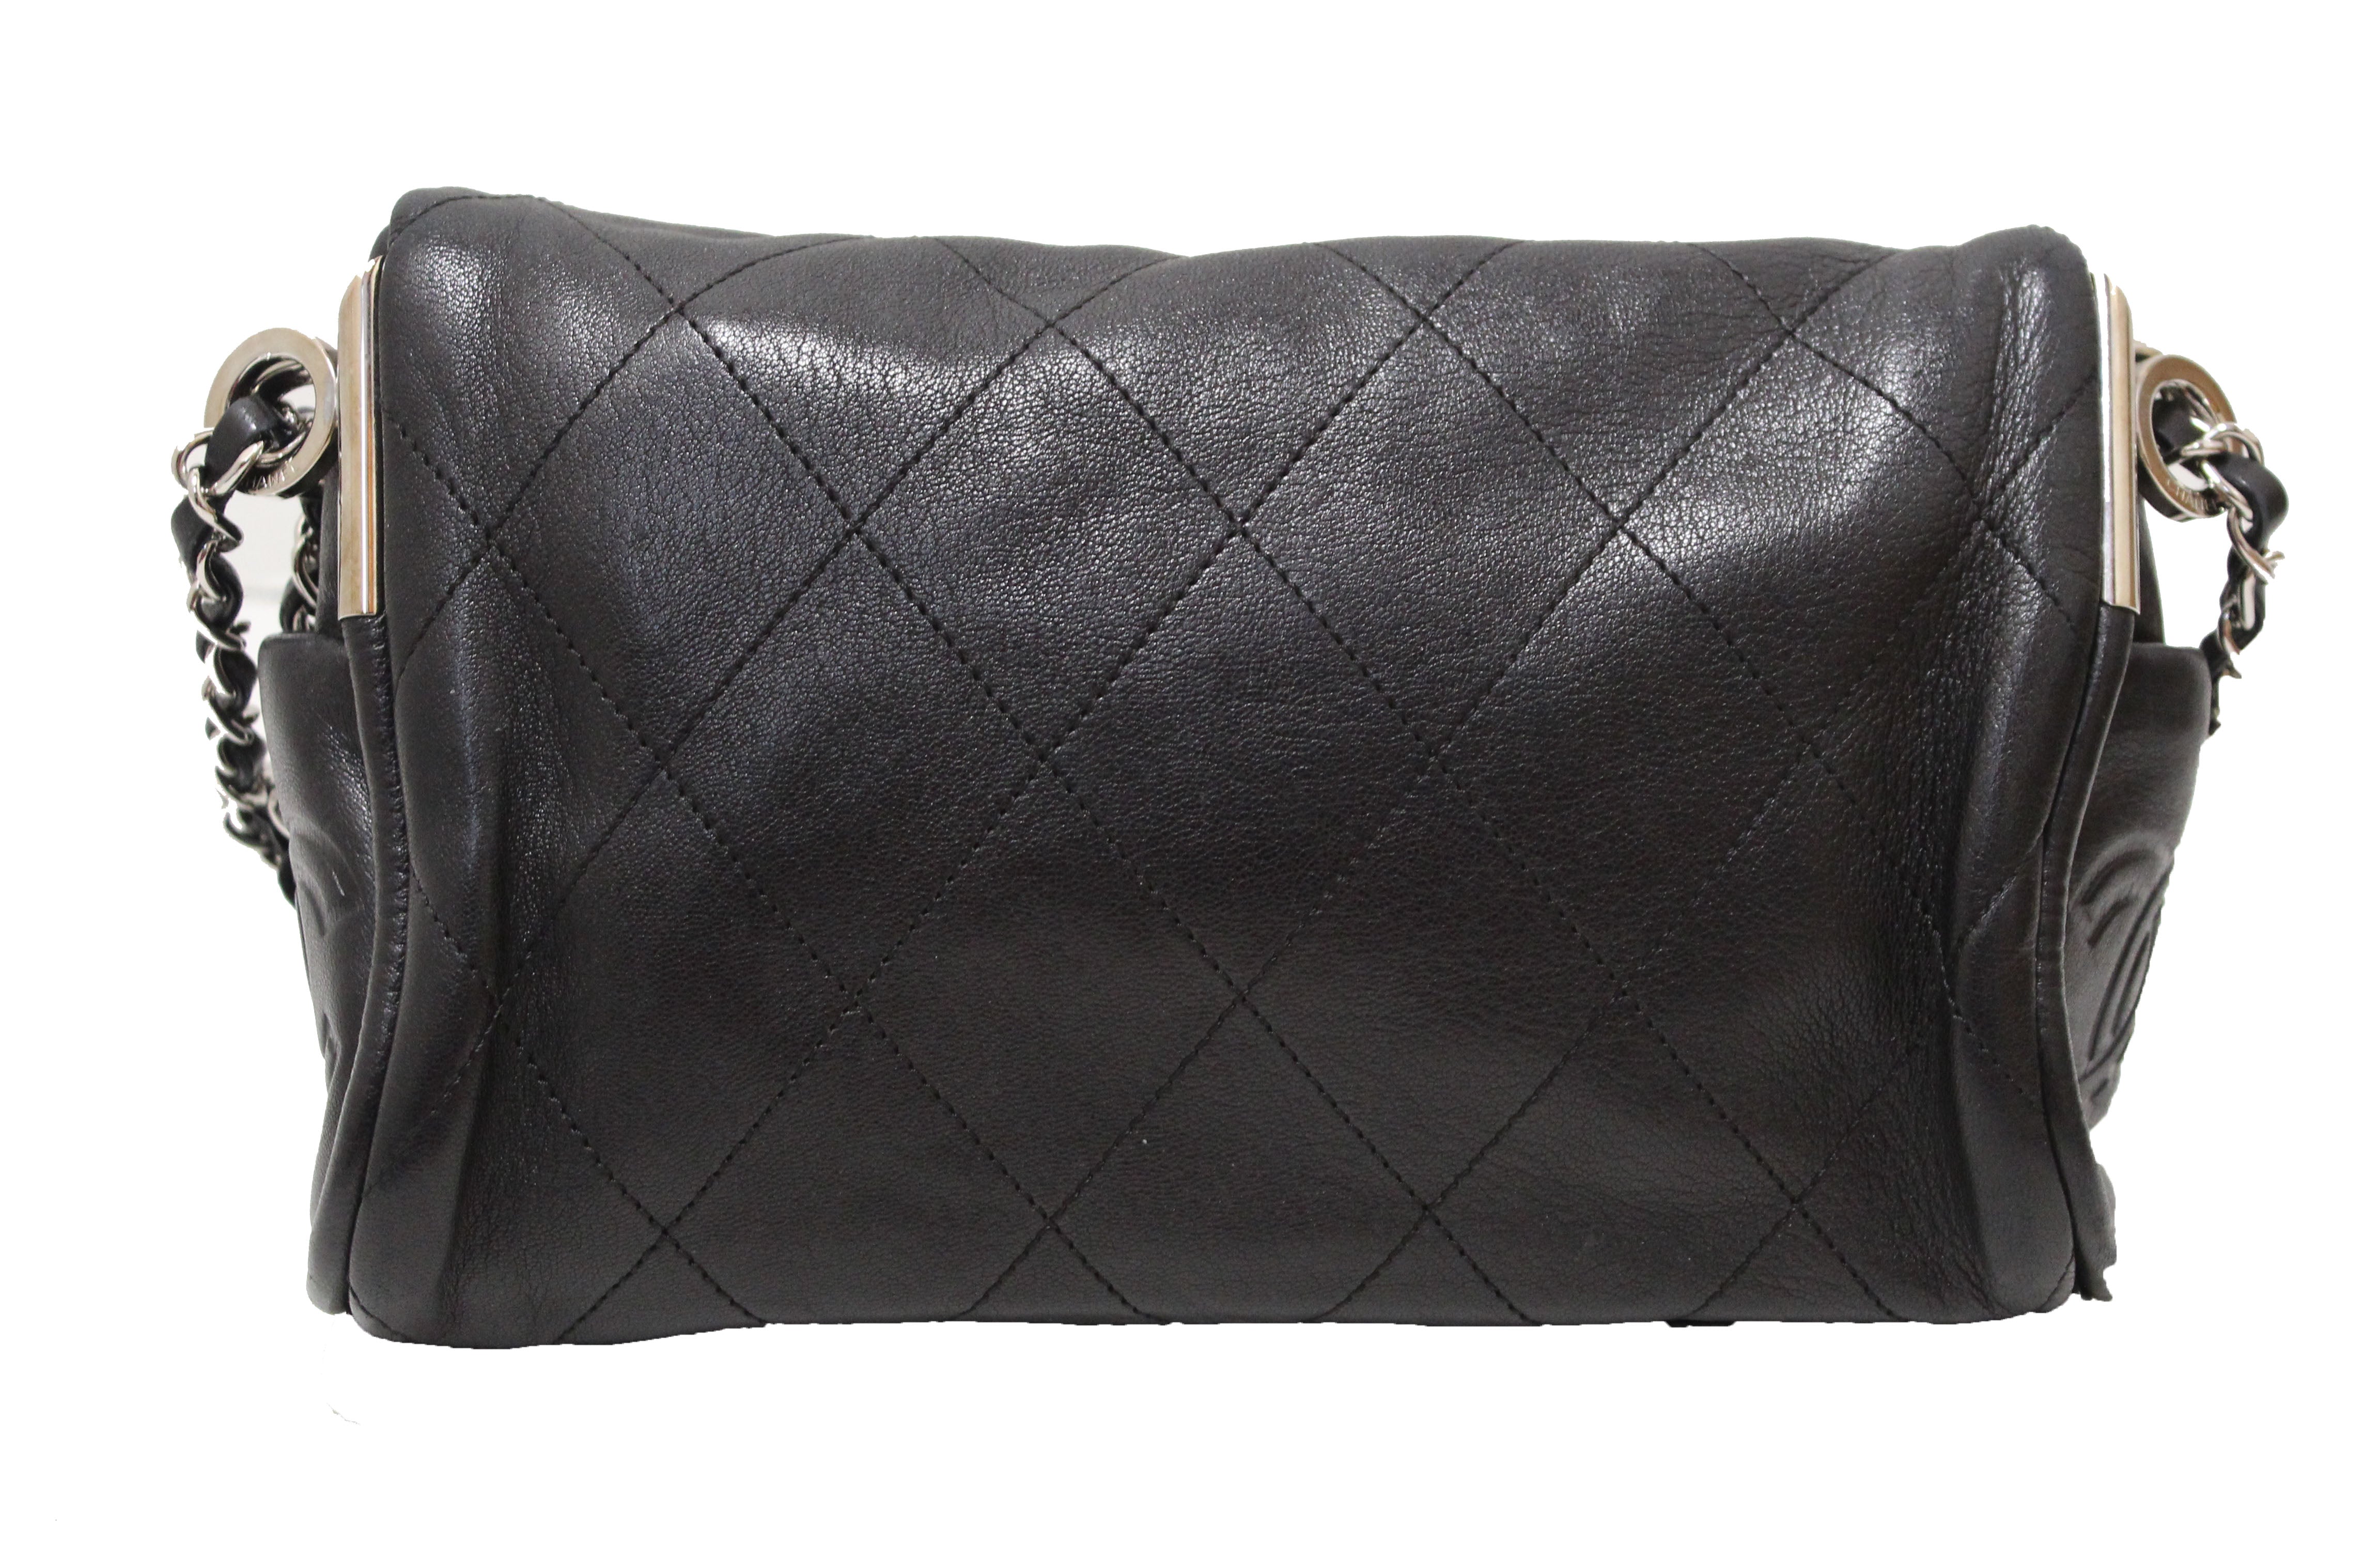 Authentic Chanel Black Quilted Lambskin Leather Ultimate Soft Mini Hobo Shoulder Bag